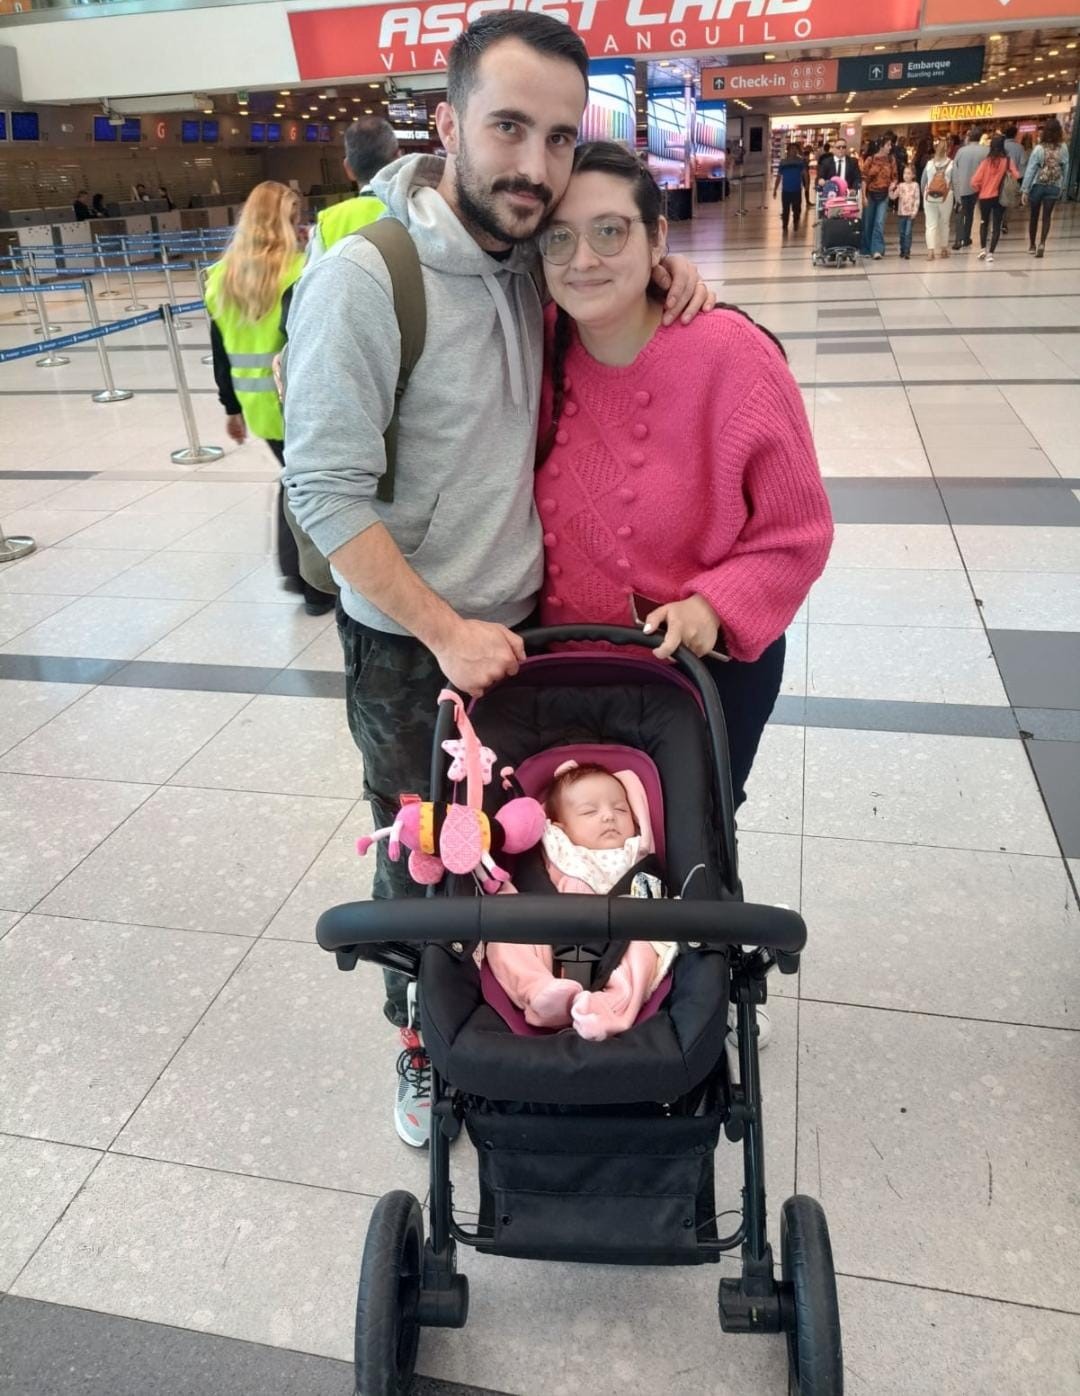 Eugenia Morales with her partner and their baby daughter (EugeniaMorales/PA)